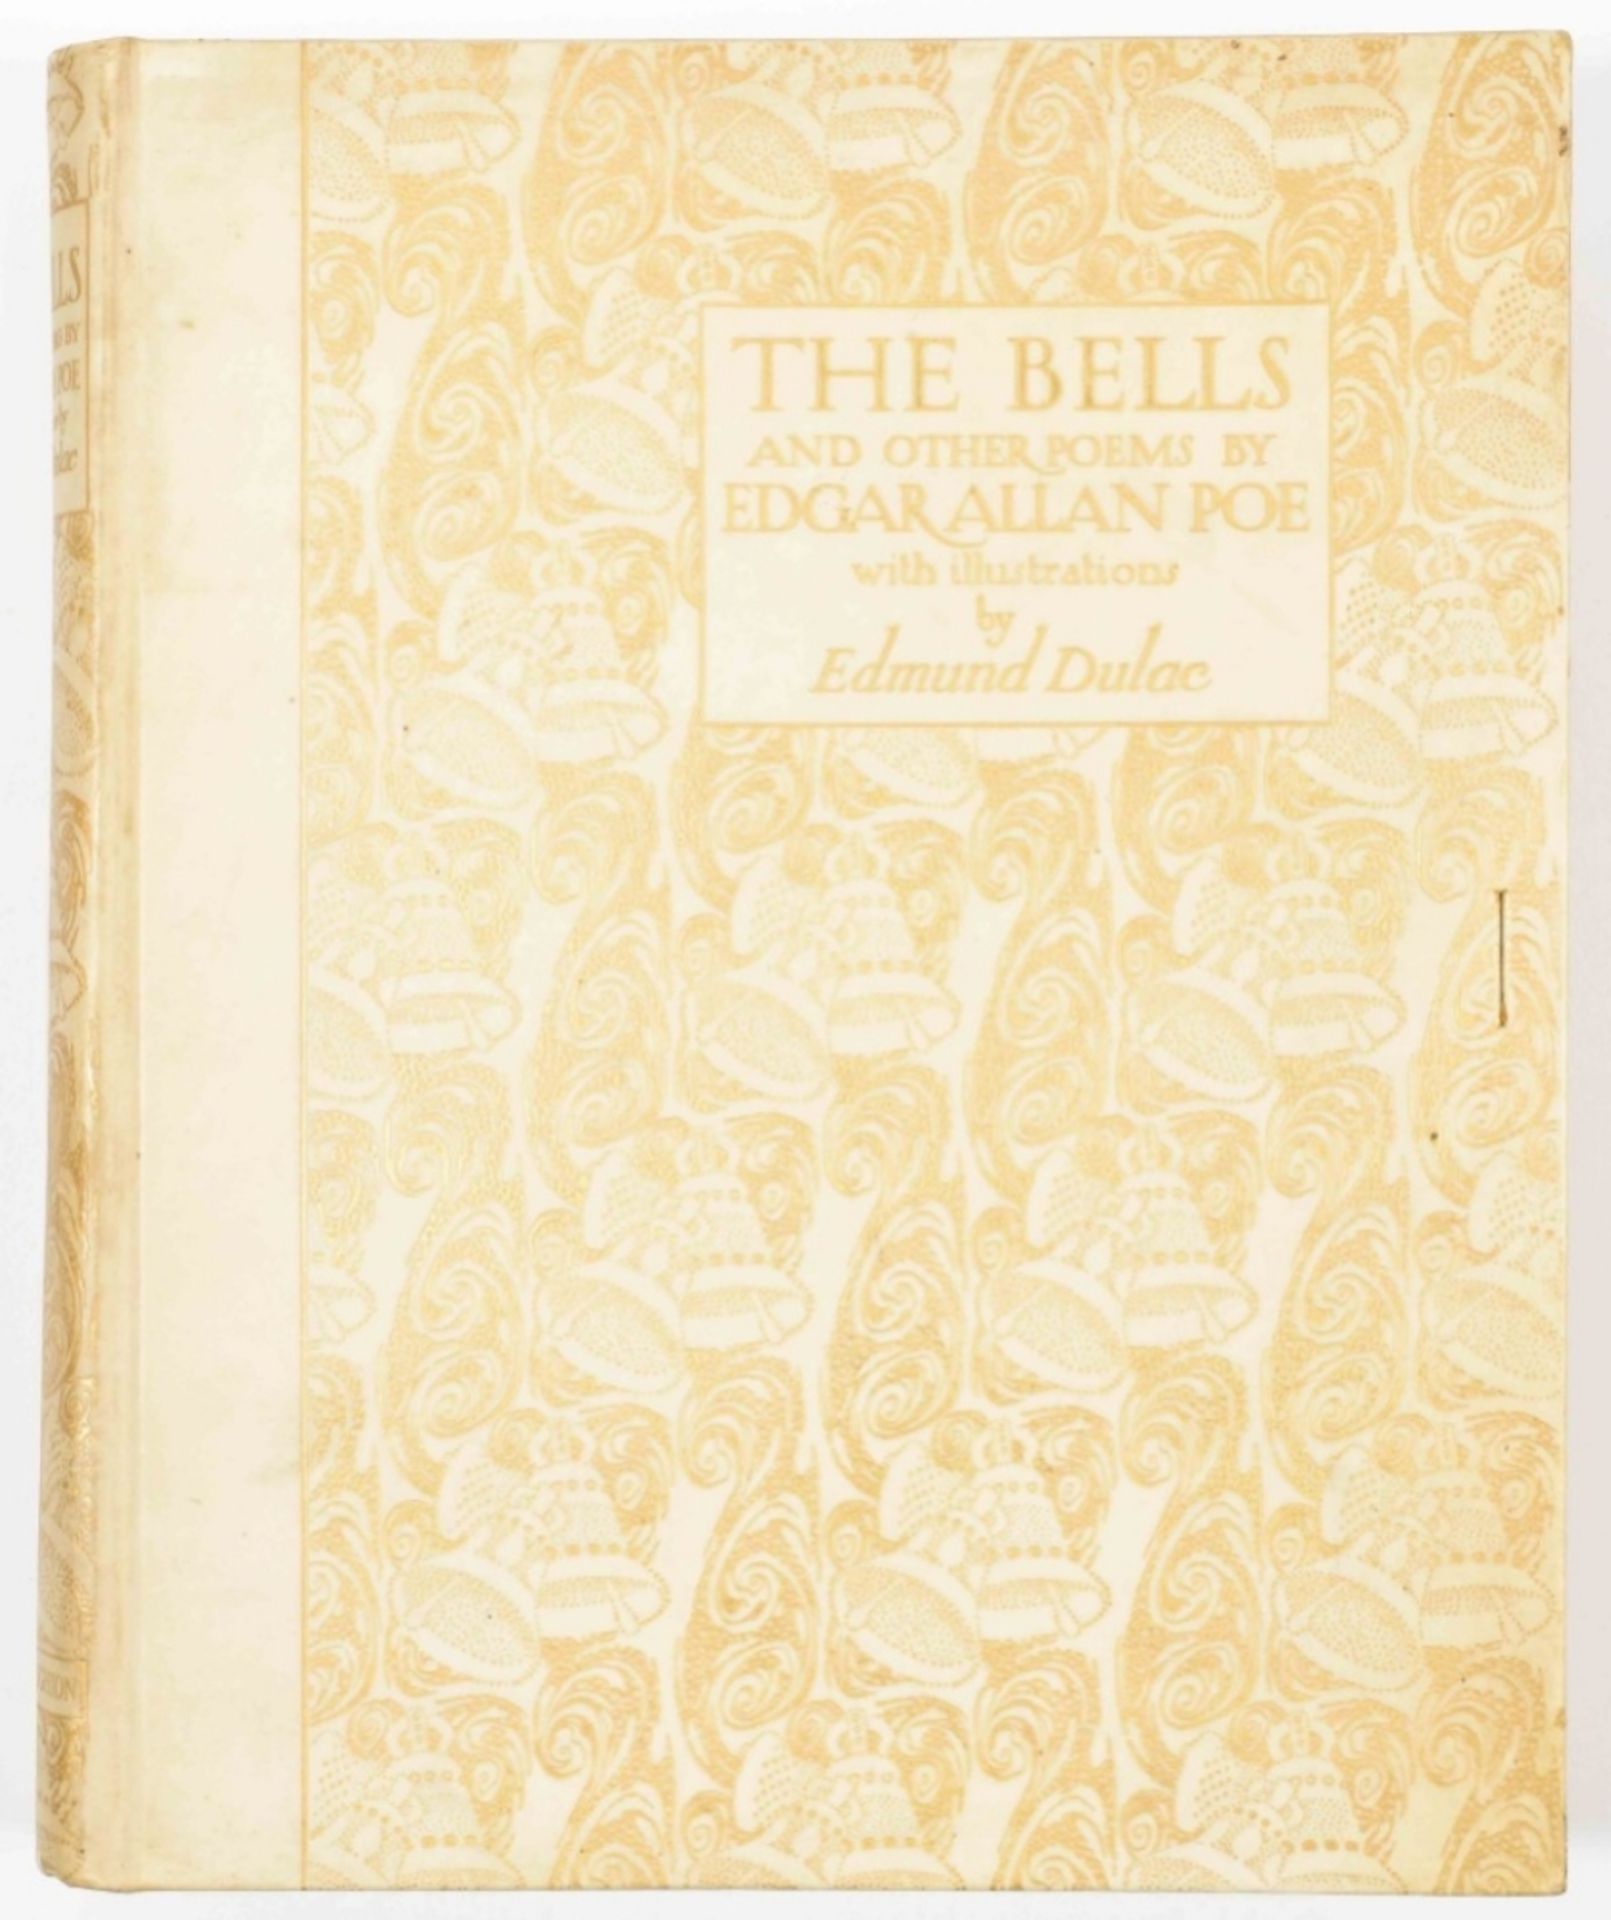 Edgar Allen Poe. The Bells and other Poems